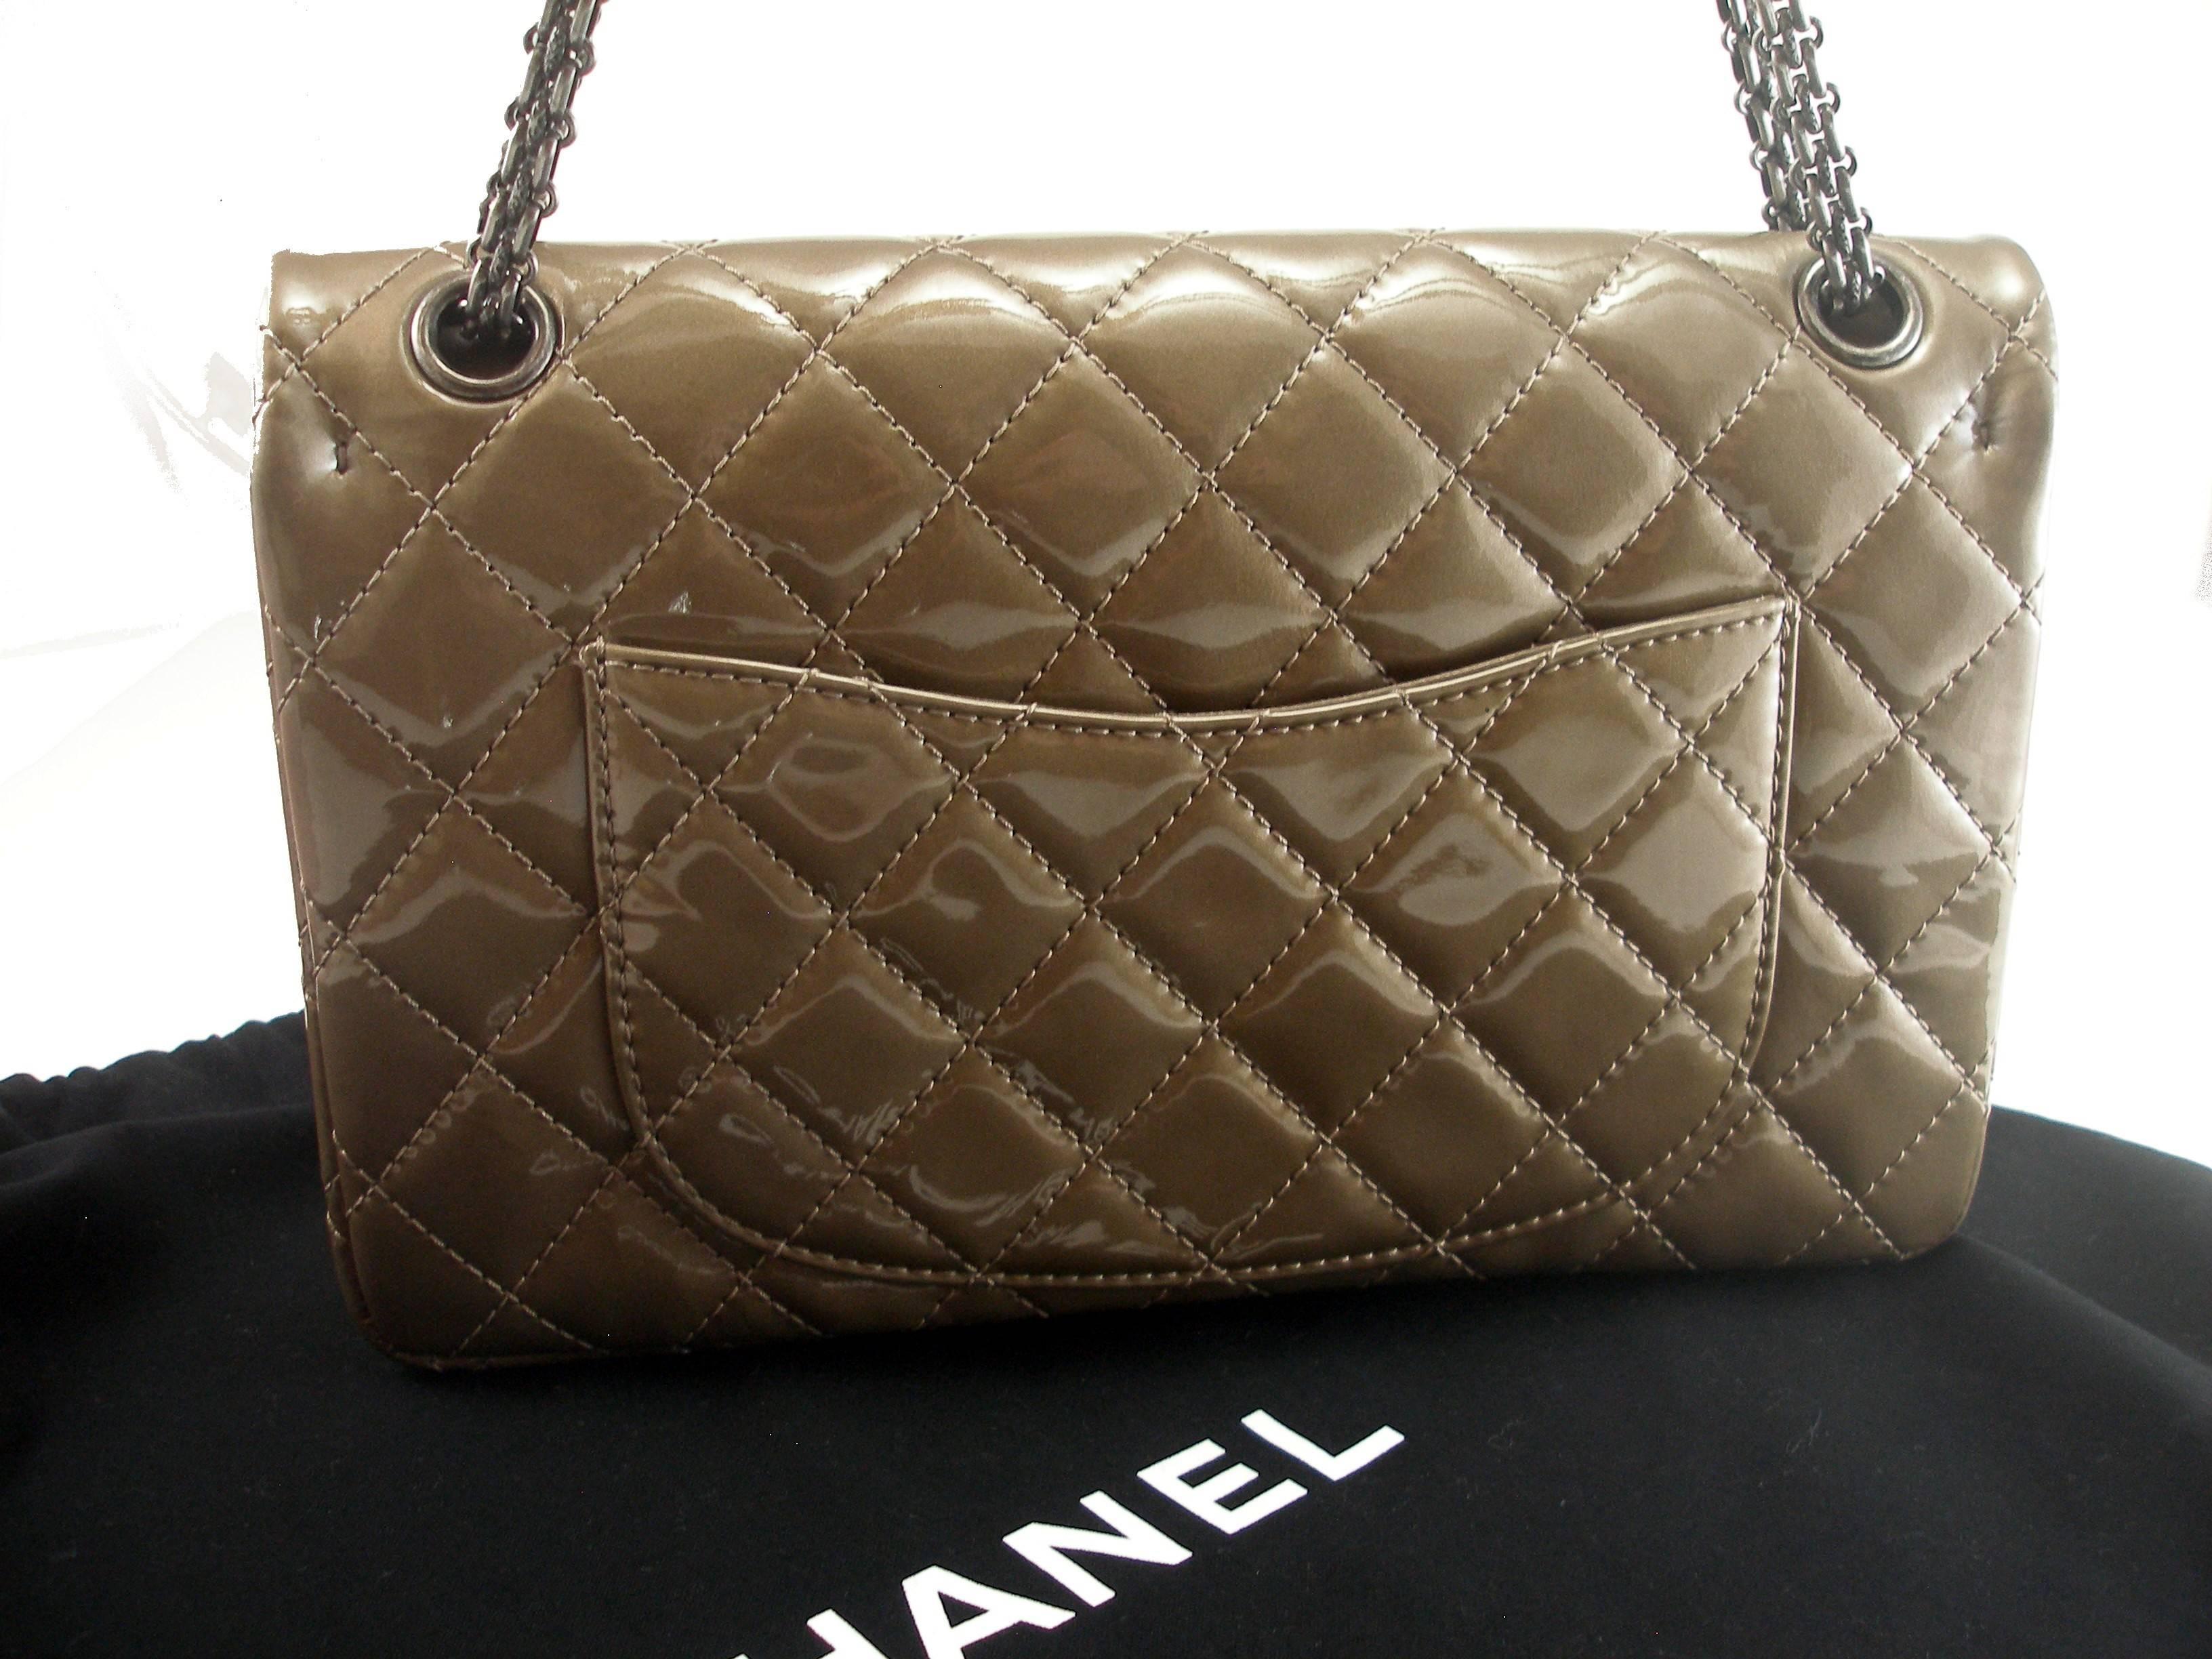 Chanel Taupe Patent Leather 2.55 Reissue Flap Bag   2